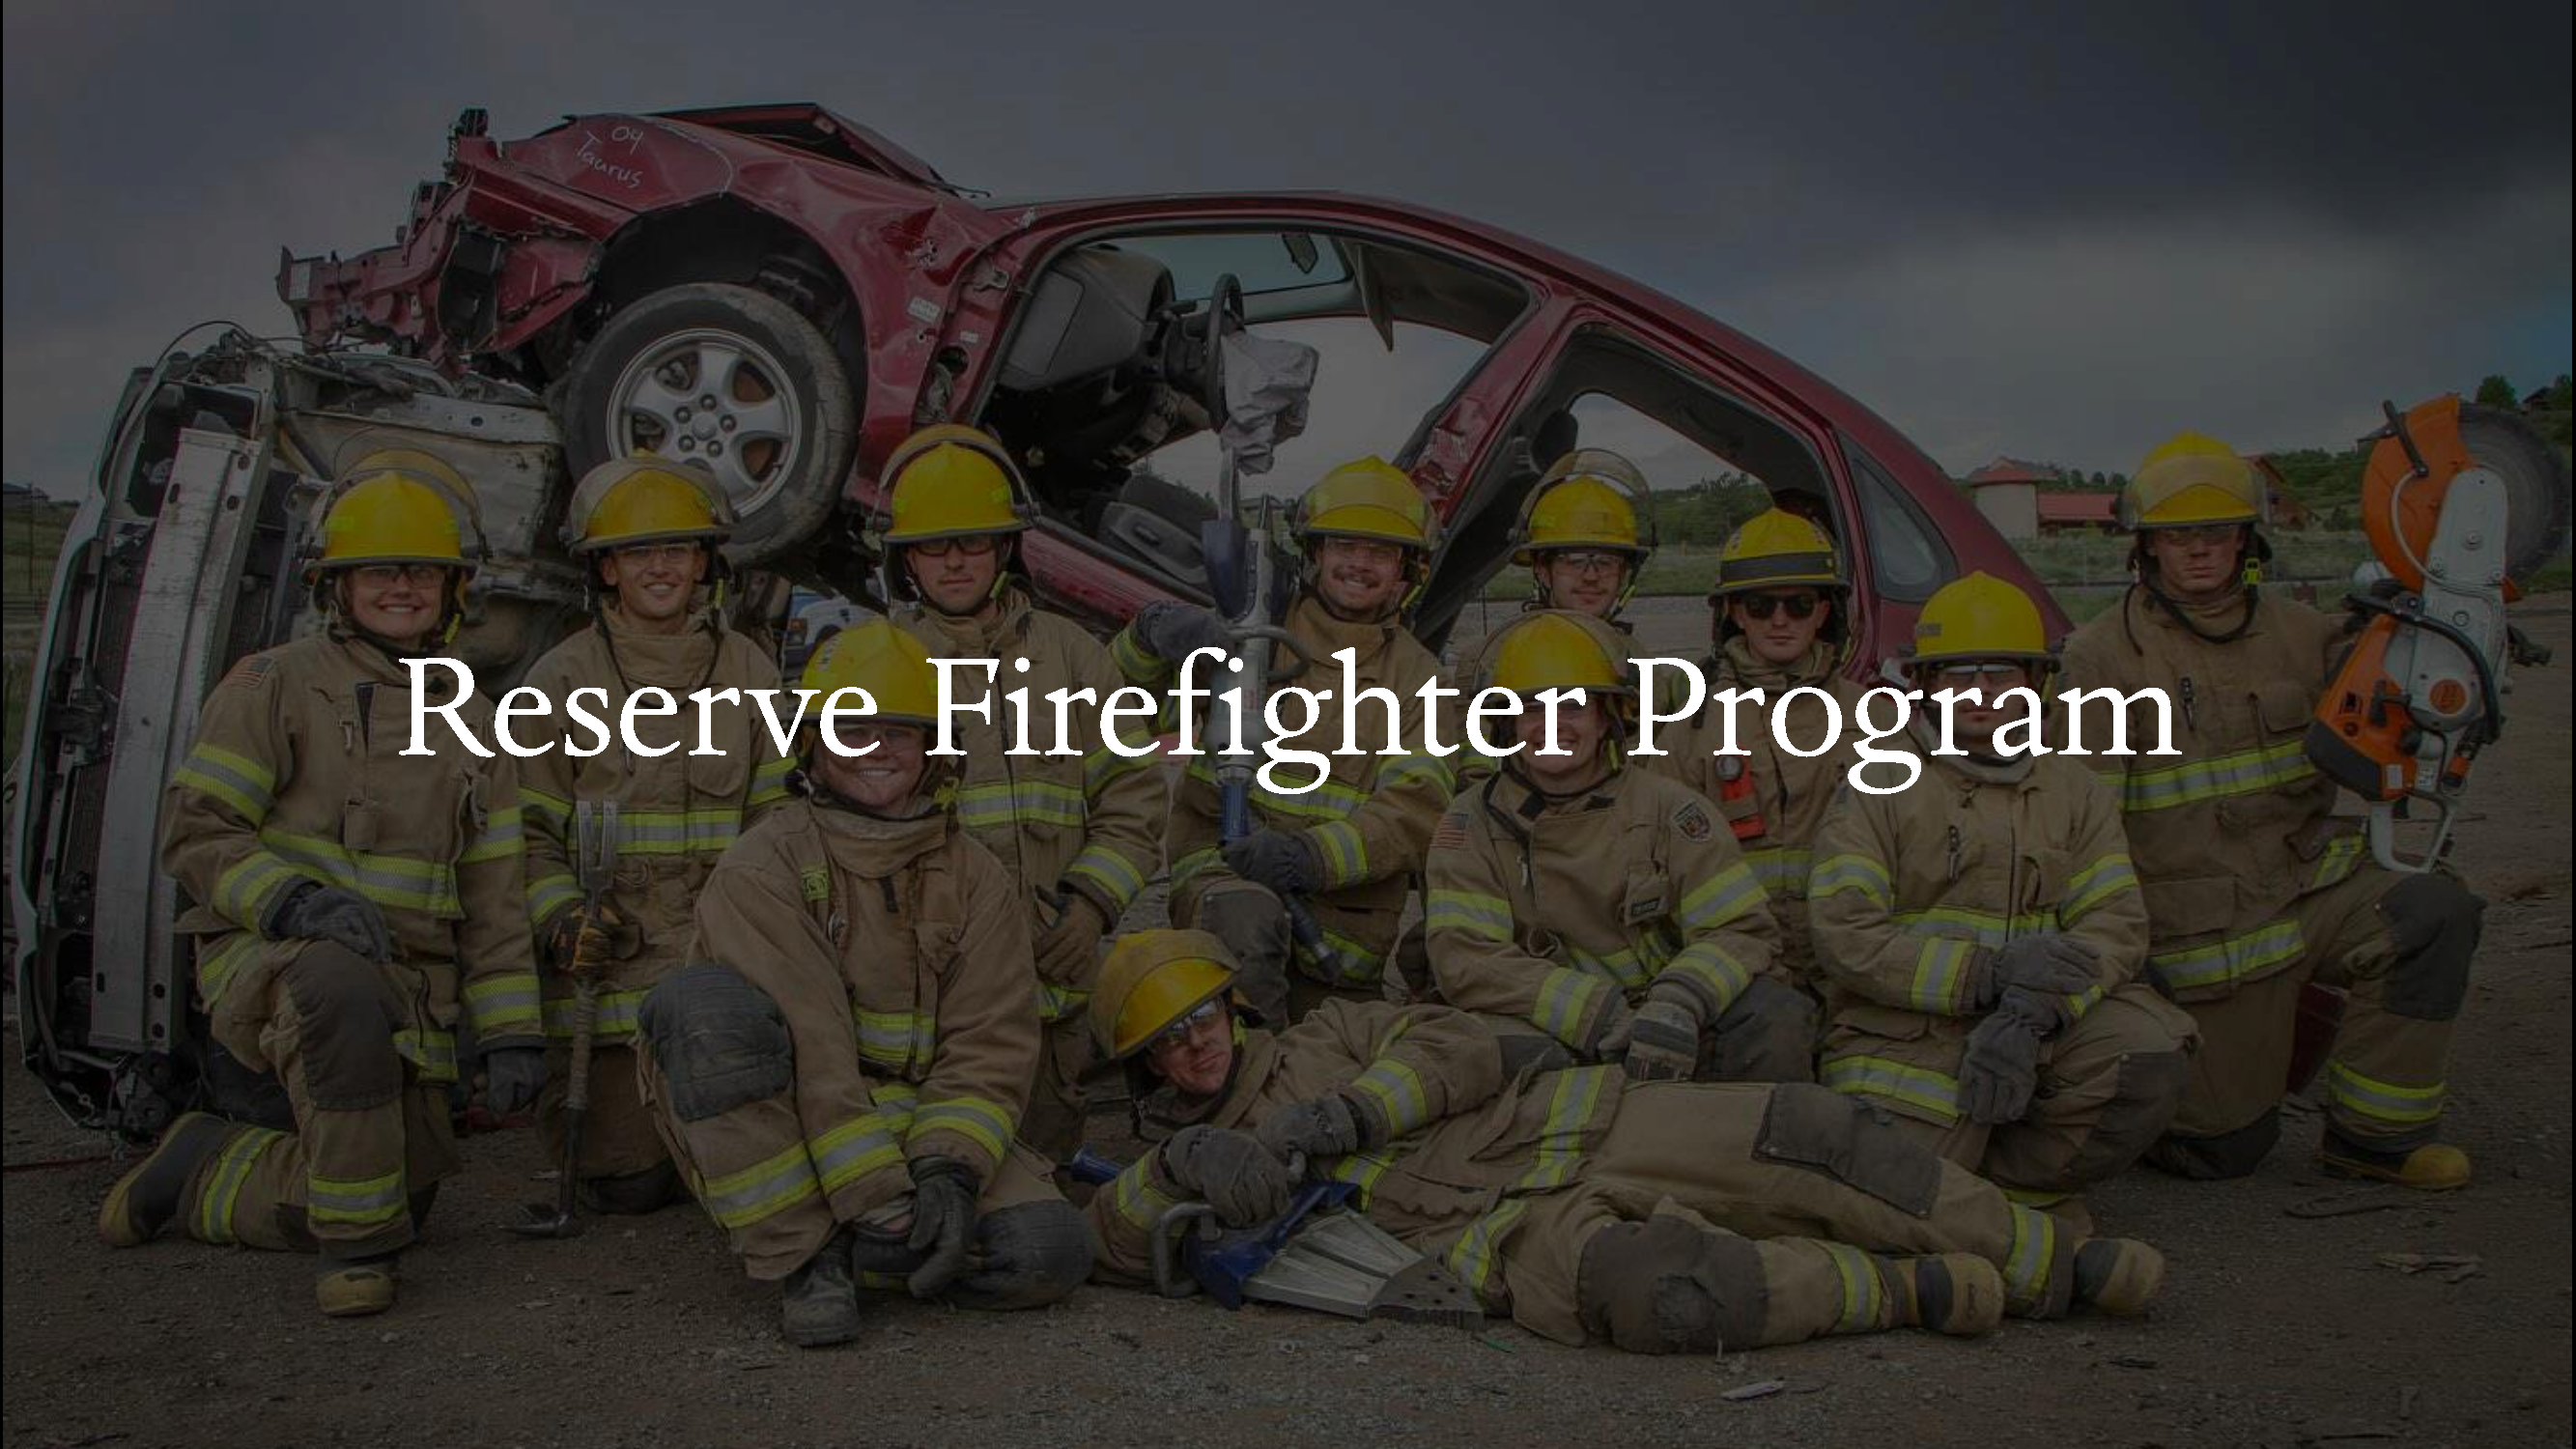 Reserve firefighters posing in front of a car during an extrication training